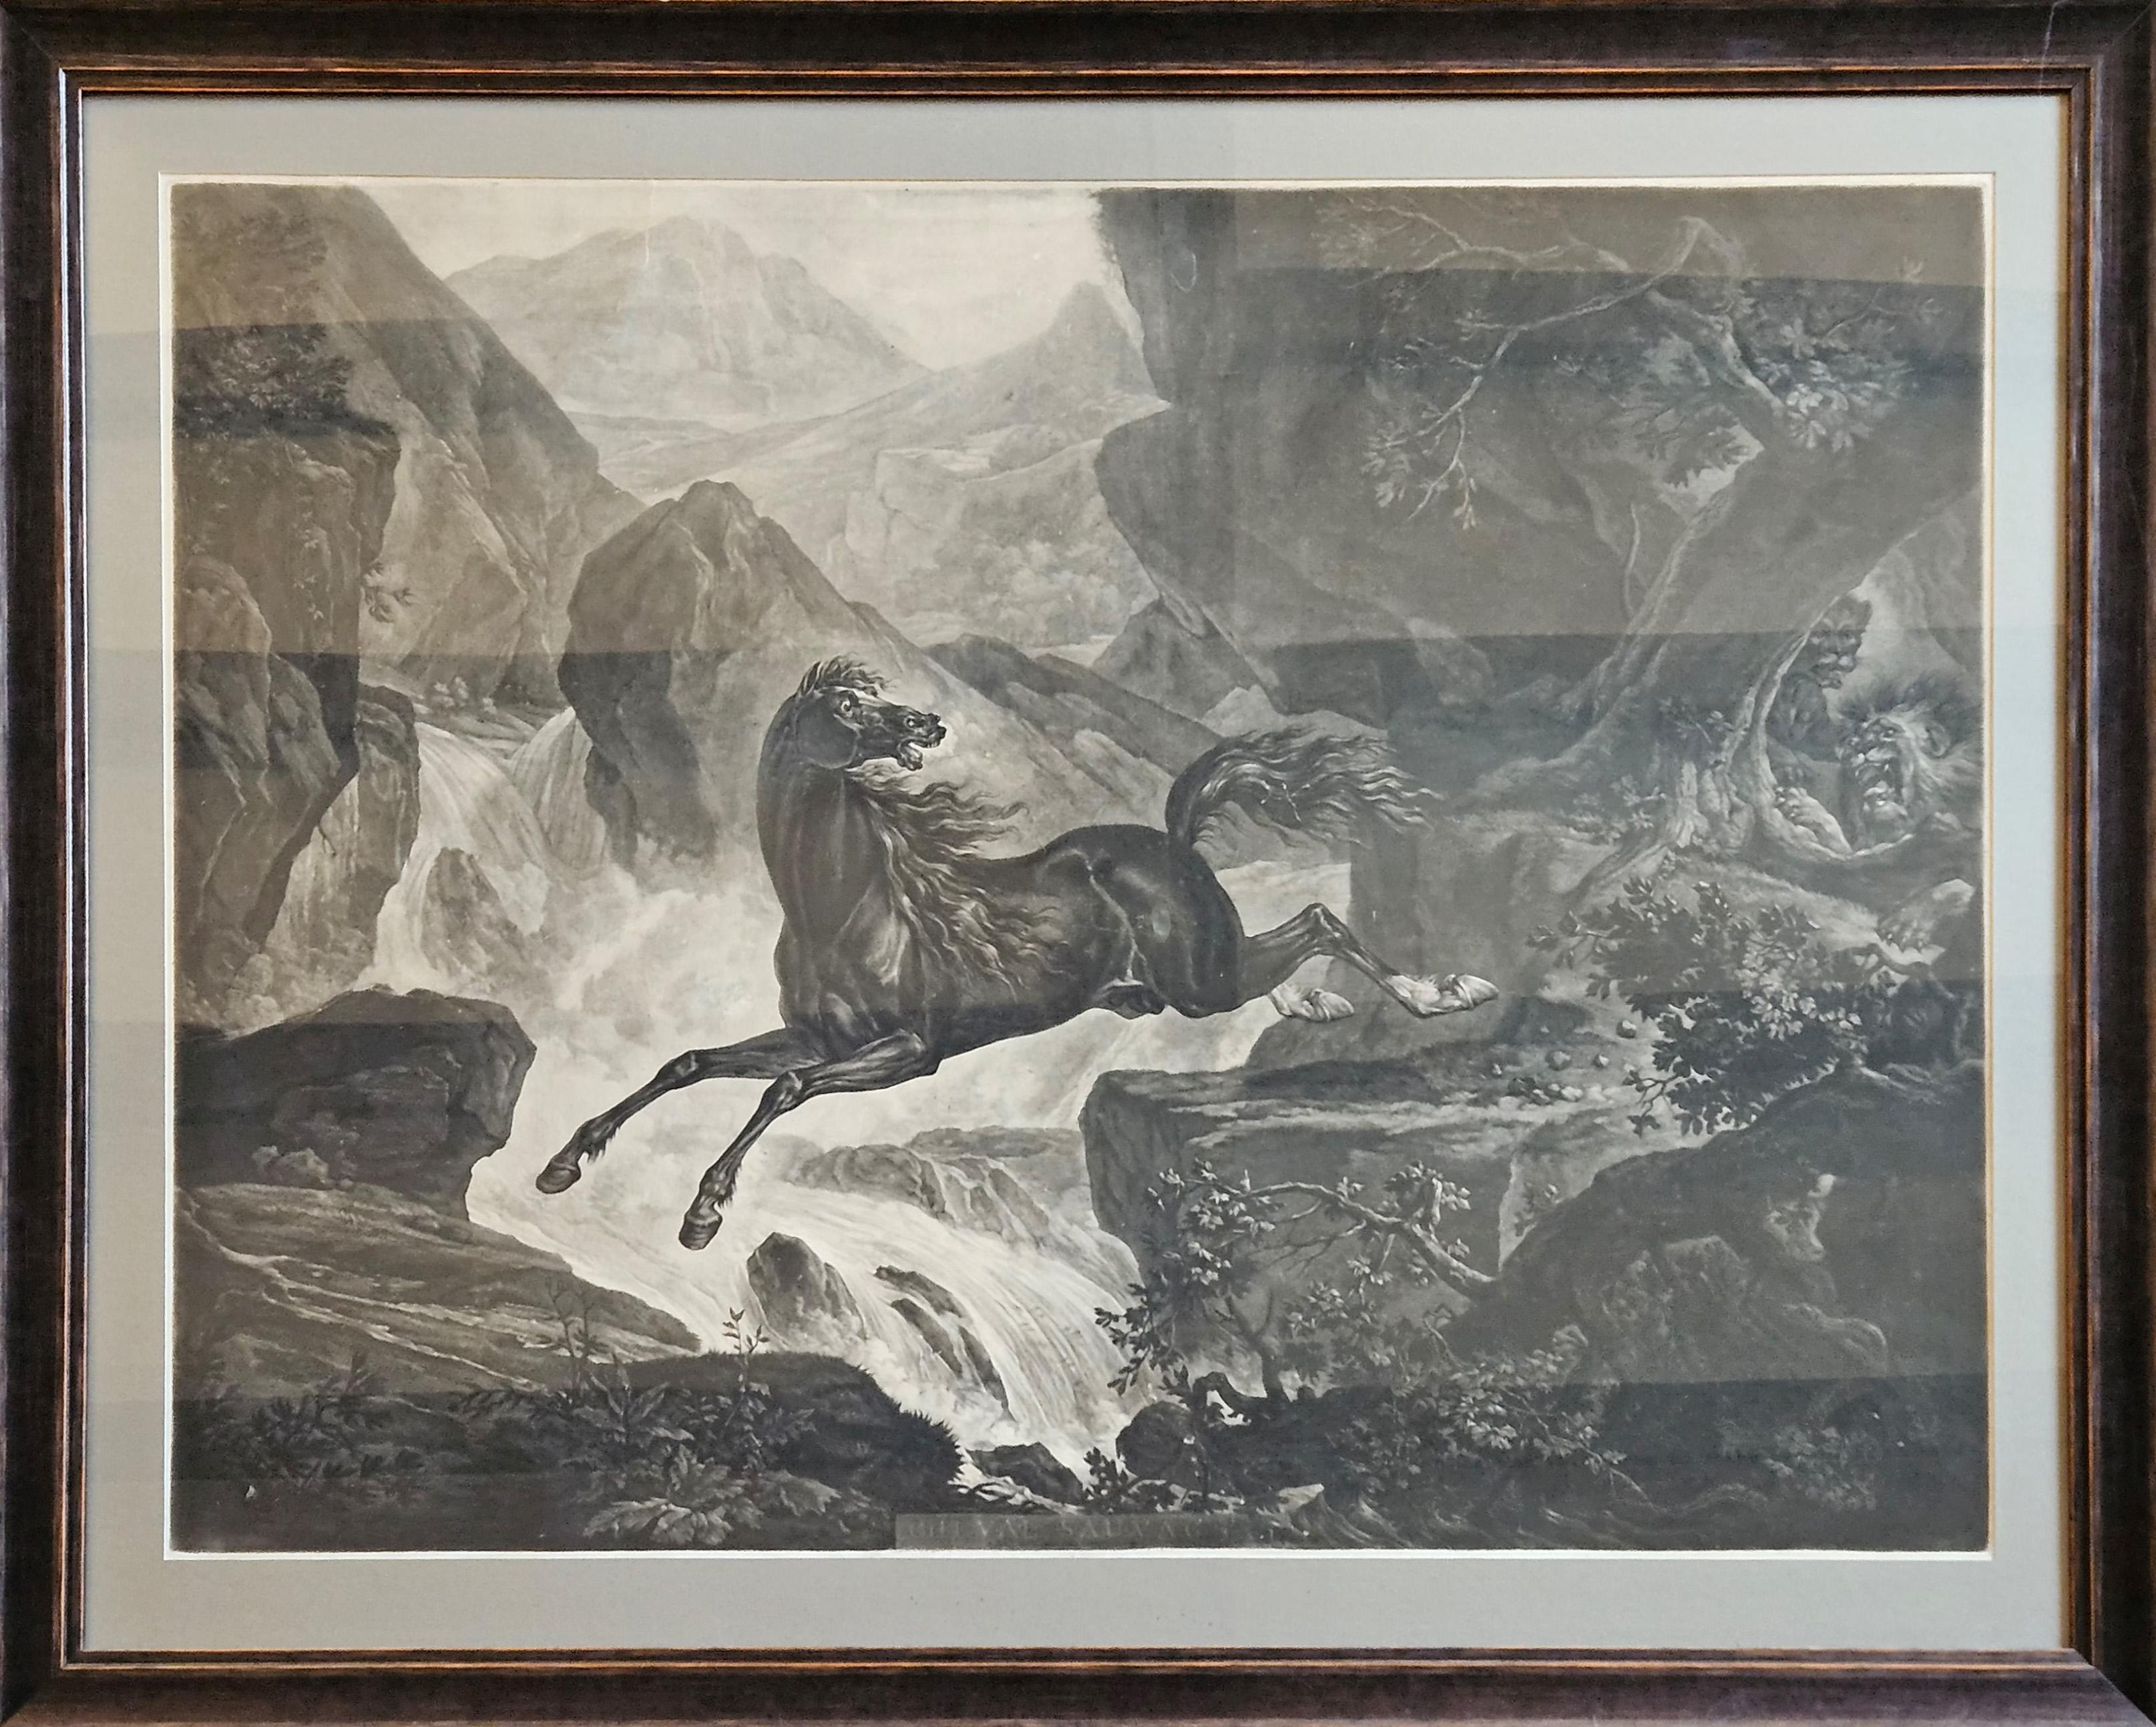 Carle Vernet Engraving "Le Cheval Sauvage" For Sale